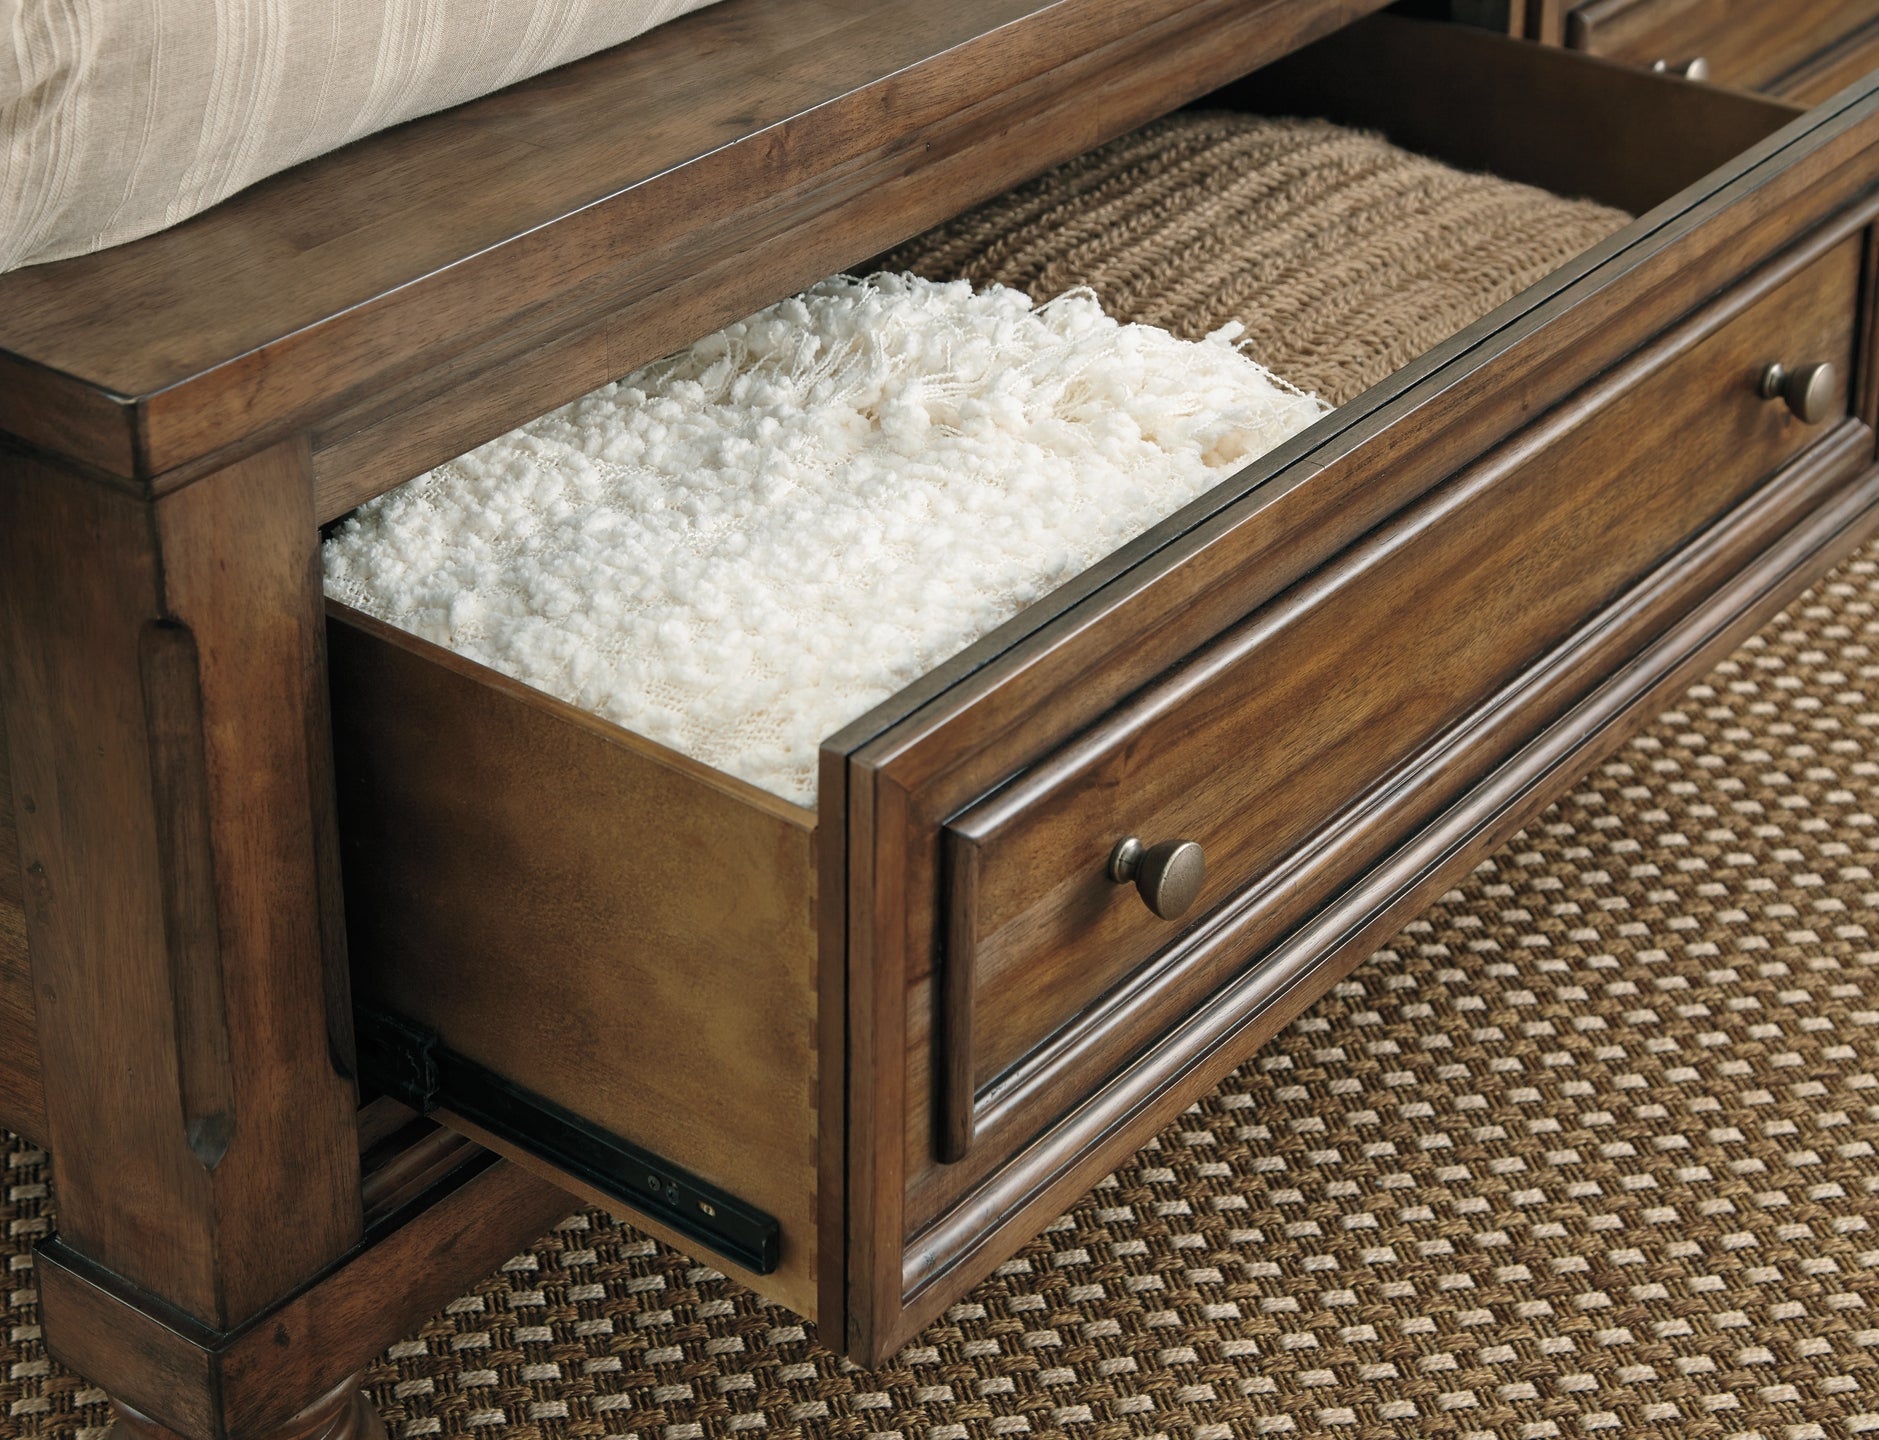 Flynnter California King Panel Bed with 2 Storage Drawers with Mirrored Dresser, Chest and Nightstand at Walker Mattress and Furniture Locations in Cedar Park and Belton TX.